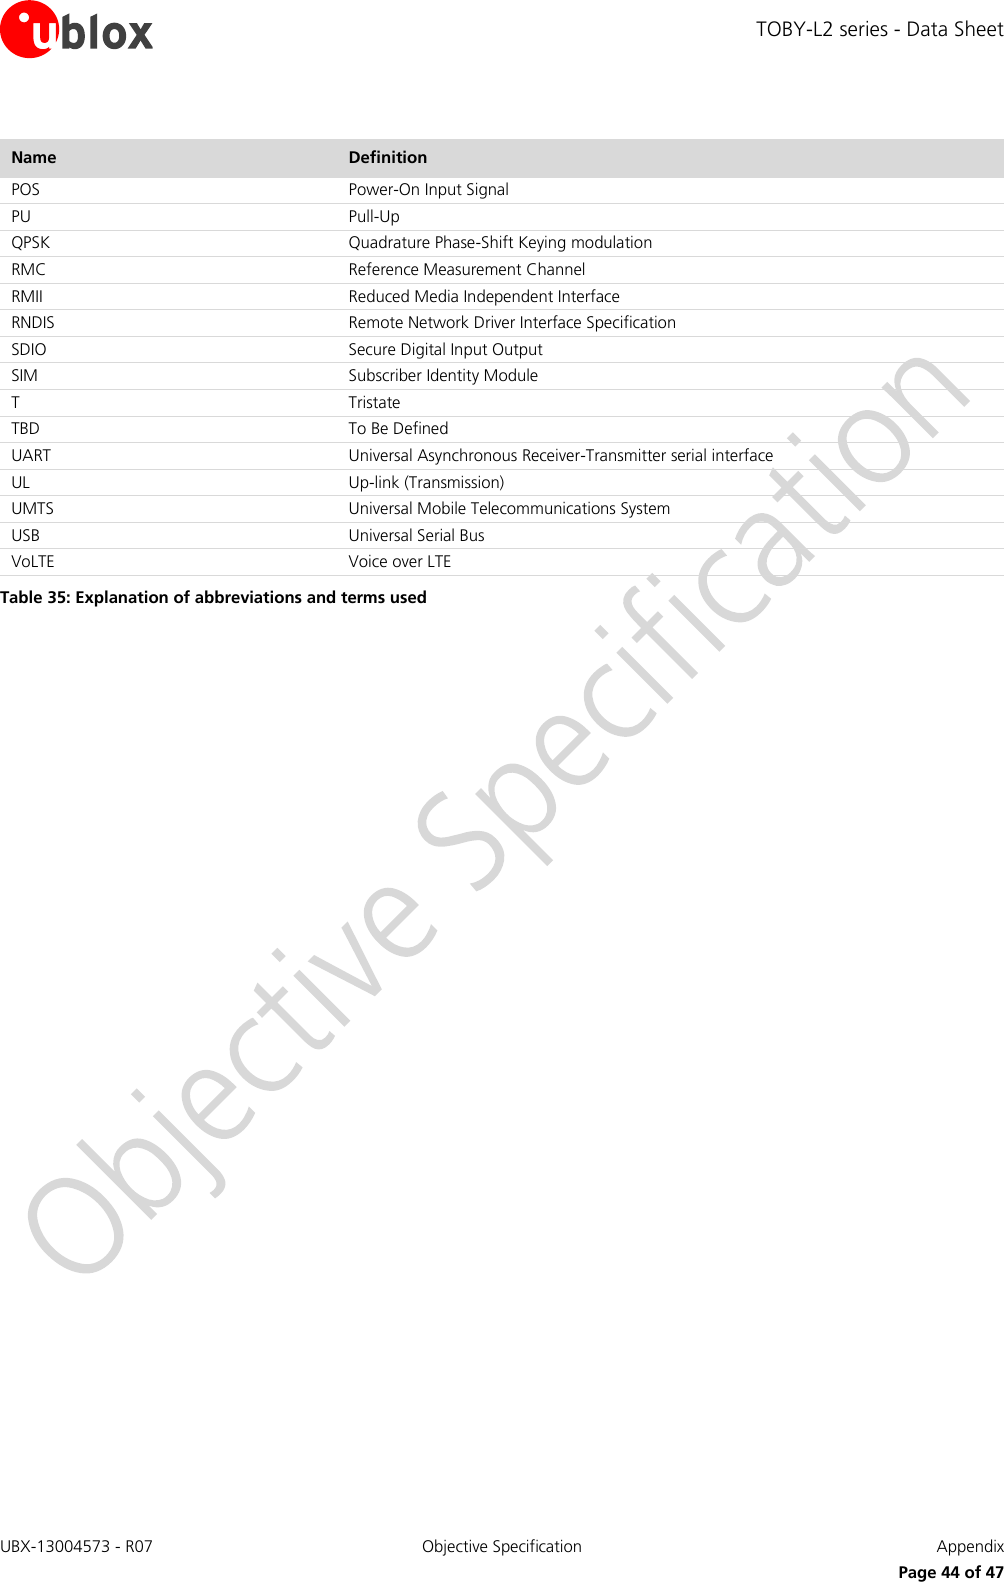 TOBY-L2 series - Data Sheet UBX-13004573 - R07  Objective Specification  Appendix   Page 44 of 47 Name Definition POS Power-On Input Signal PU Pull-Up QPSK Quadrature Phase-Shift Keying modulation RMC Reference Measurement Channel RMII Reduced Media Independent Interface RNDIS Remote Network Driver Interface Specification SDIO Secure Digital Input Output  SIM Subscriber Identity Module T Tristate TBD To Be Defined UART Universal Asynchronous Receiver-Transmitter serial interface UL Up-link (Transmission) UMTS Universal Mobile Telecommunications System USB Universal Serial Bus  VoLTE Voice over LTE Table 35: Explanation of abbreviations and terms used  